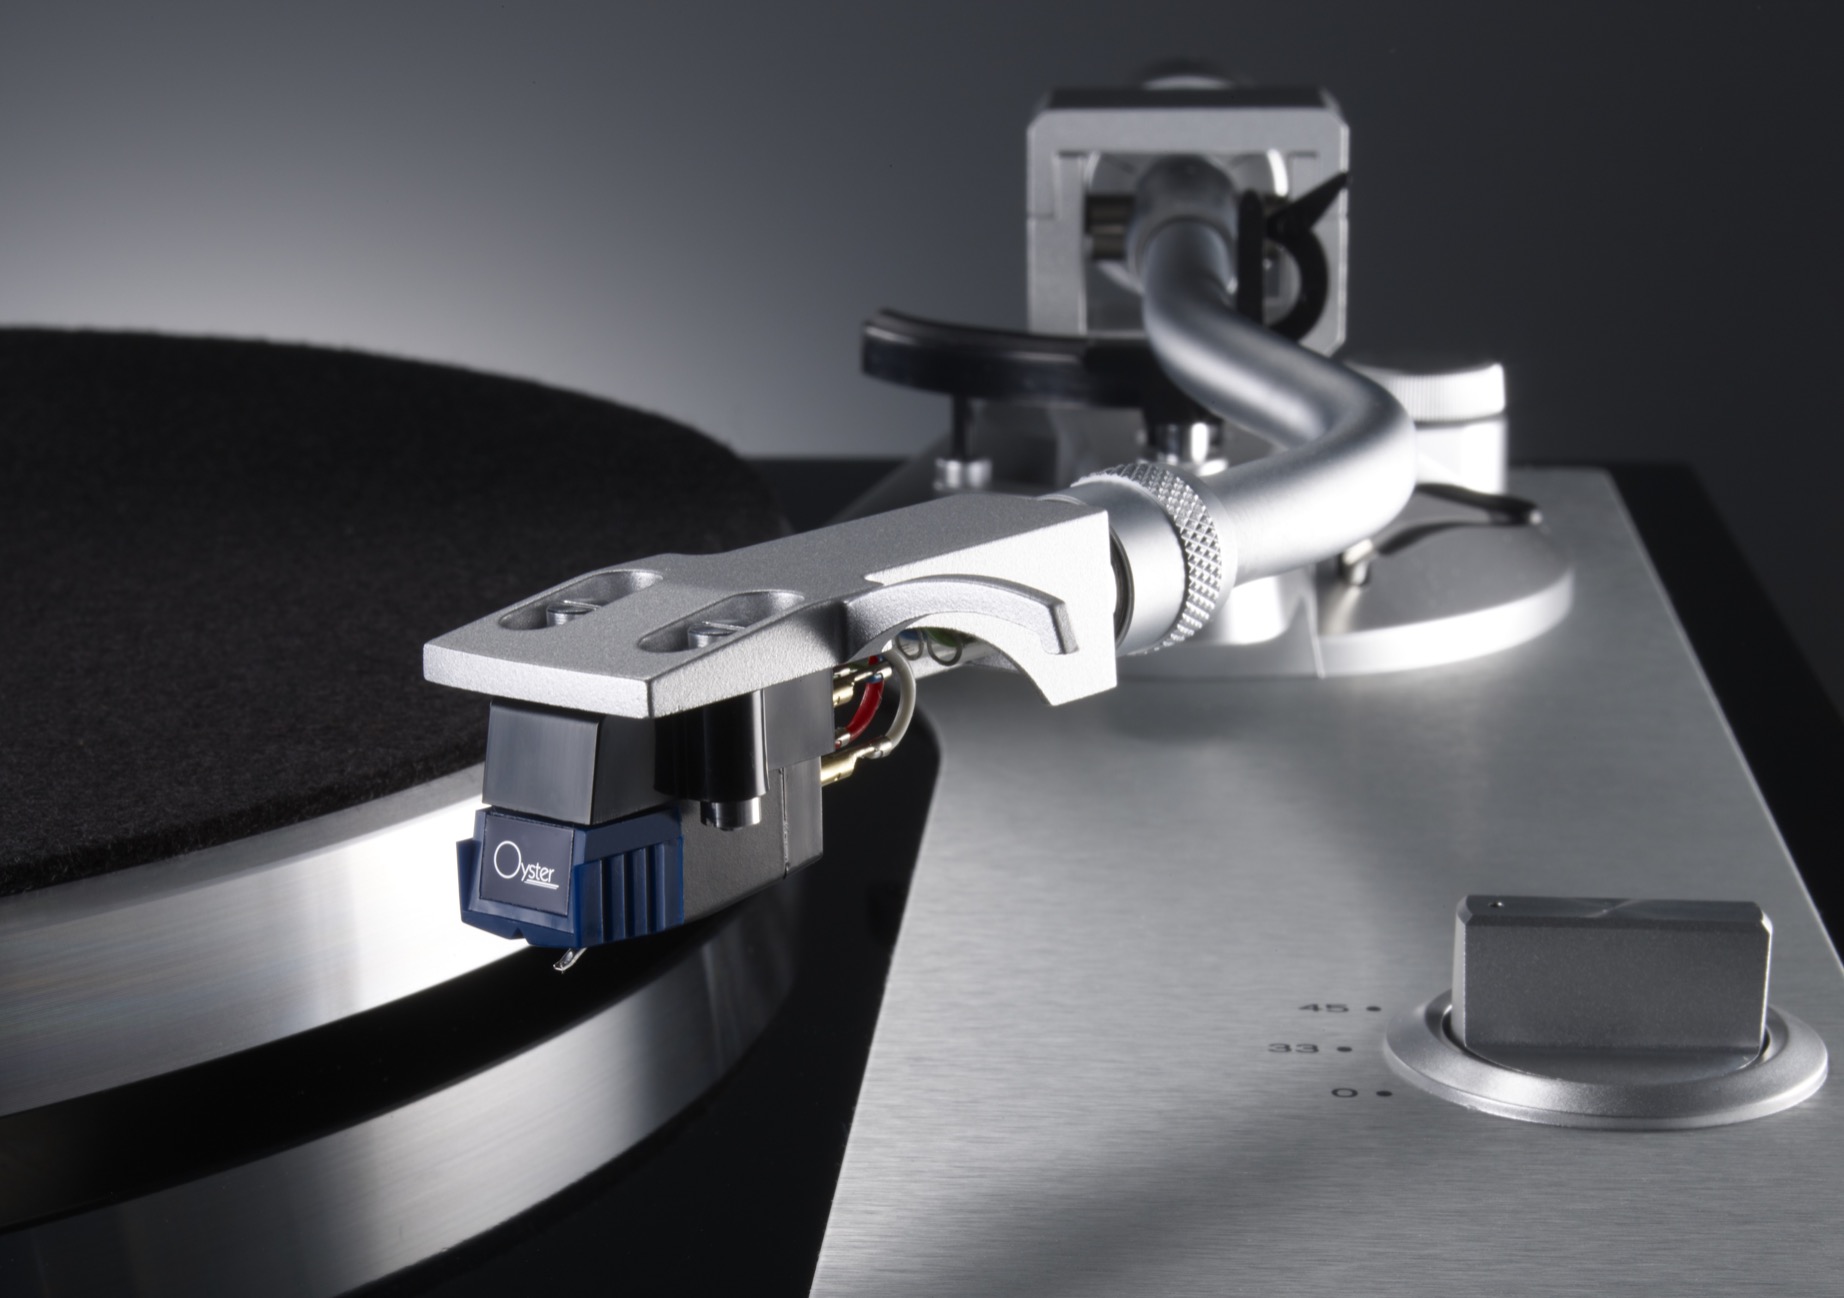 TN-4D Direct Drive Turntable From Teac